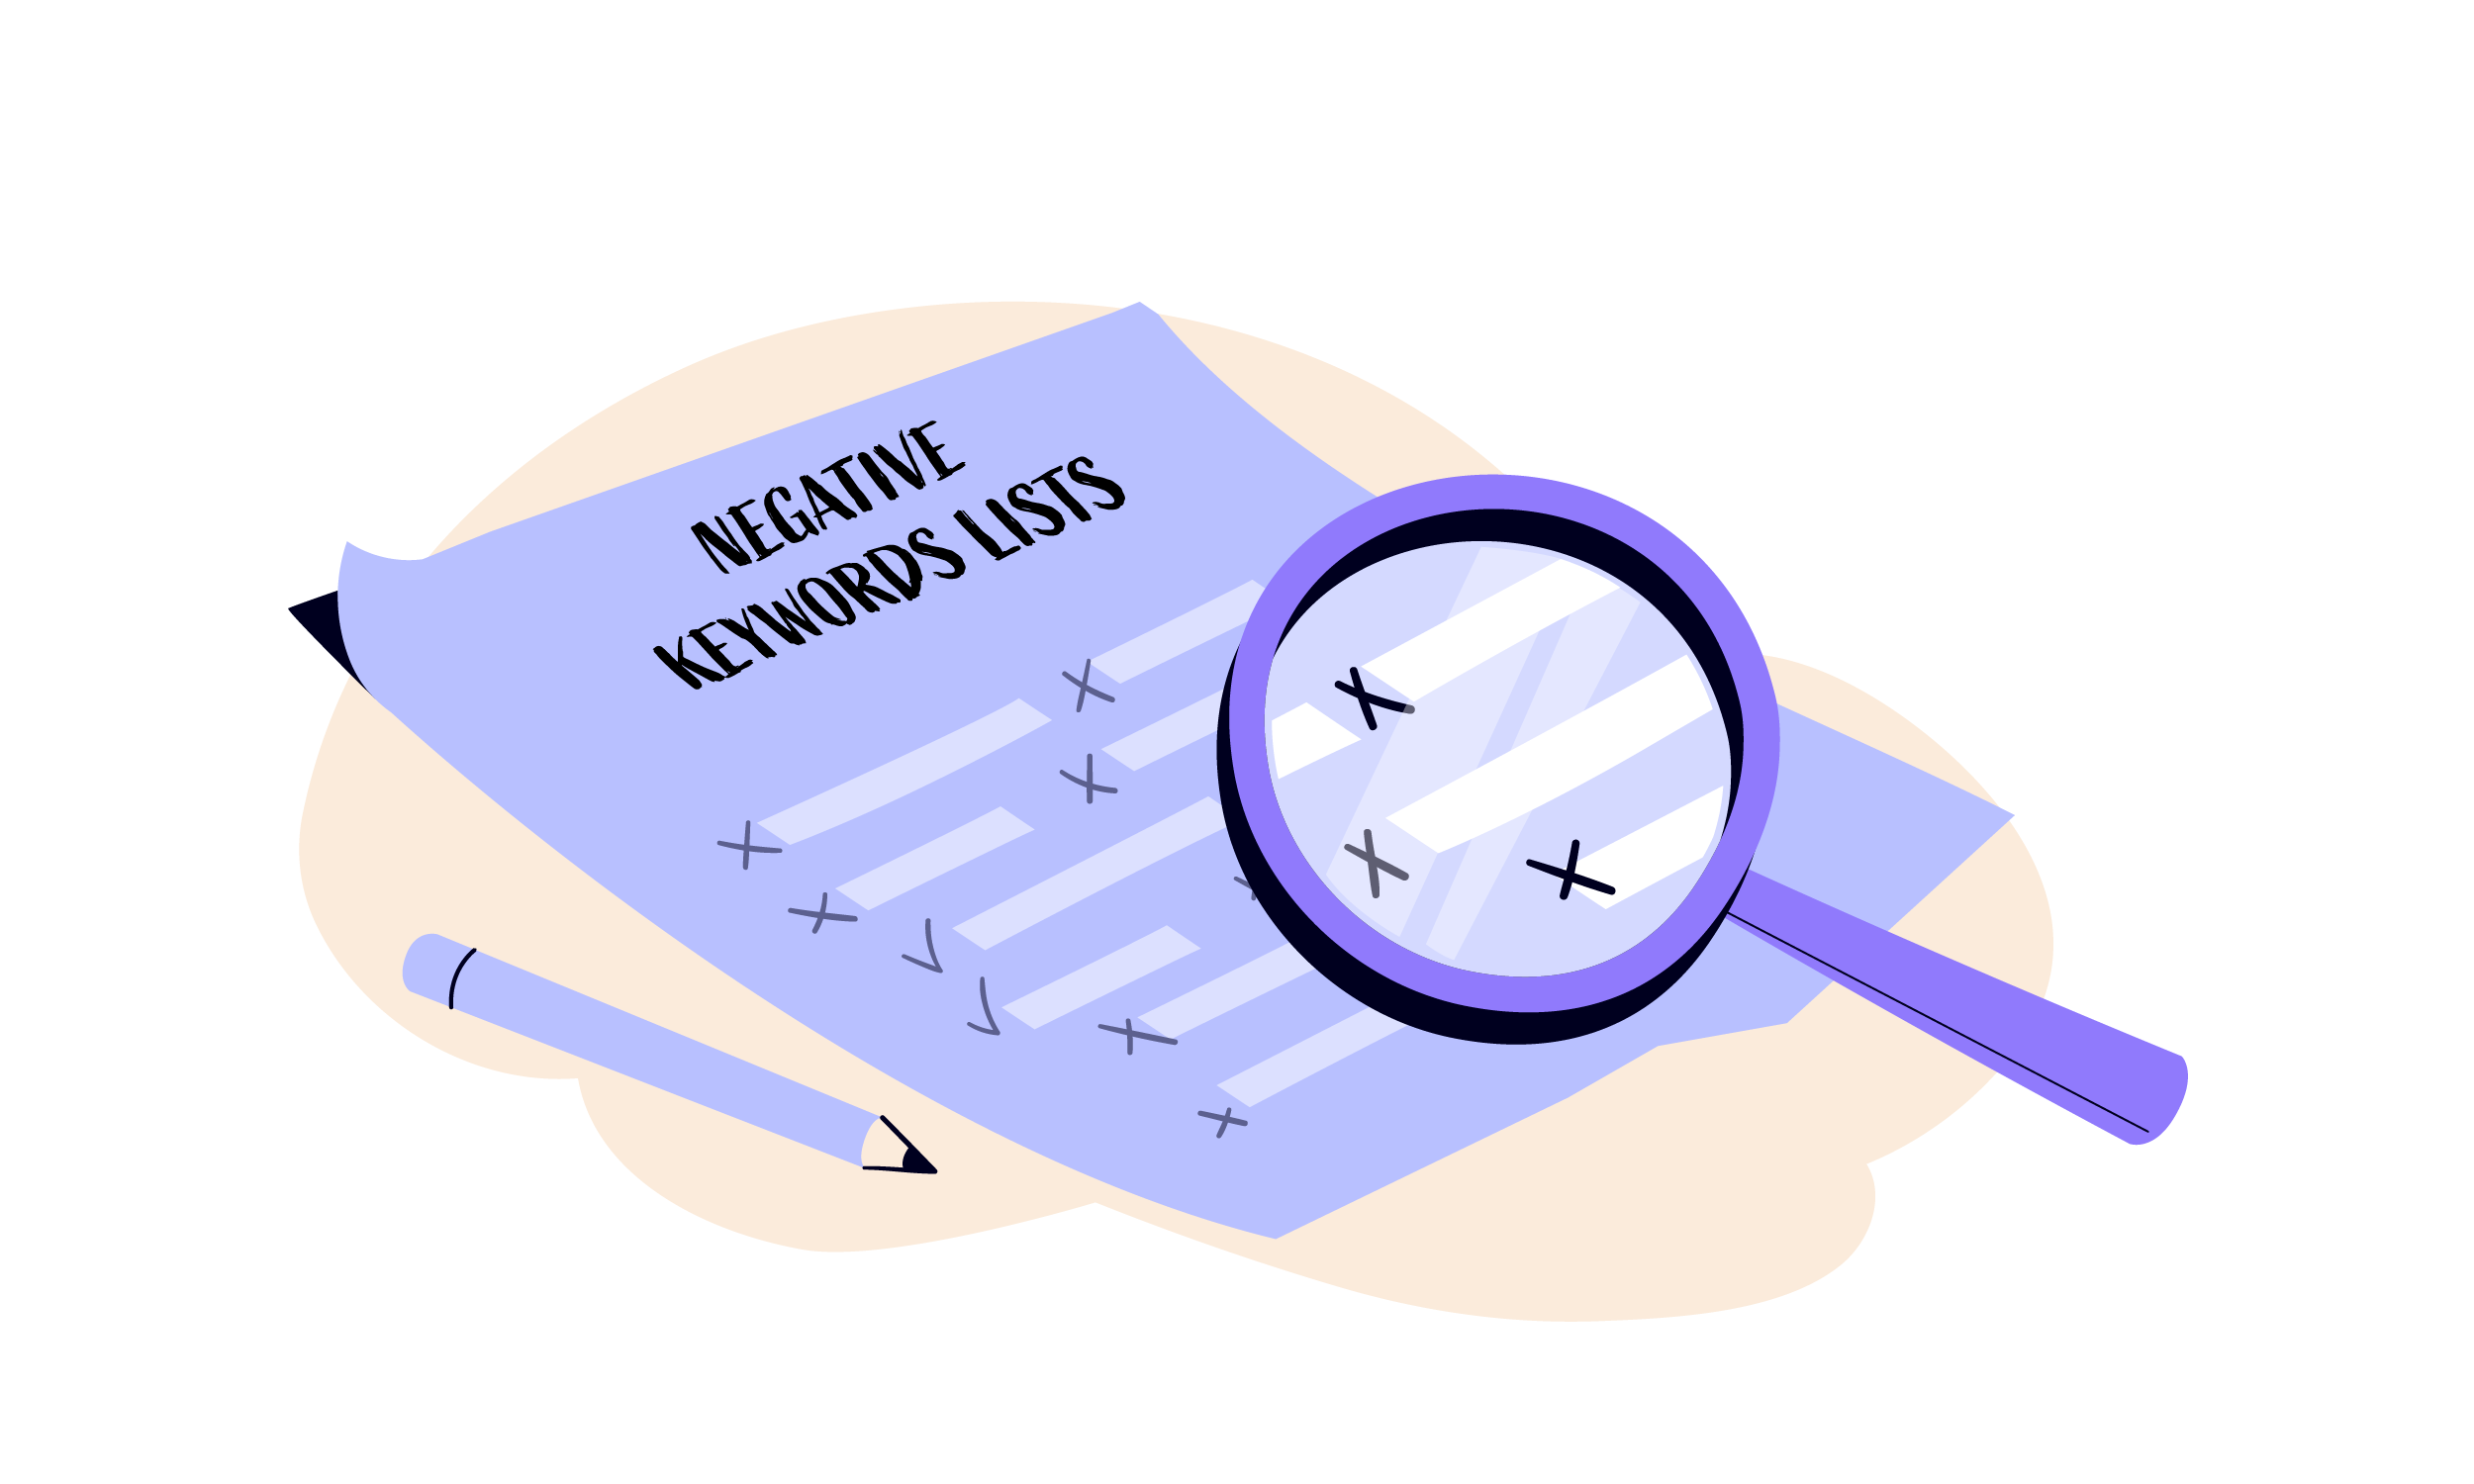 illustration of negative keywords with magnifying glass